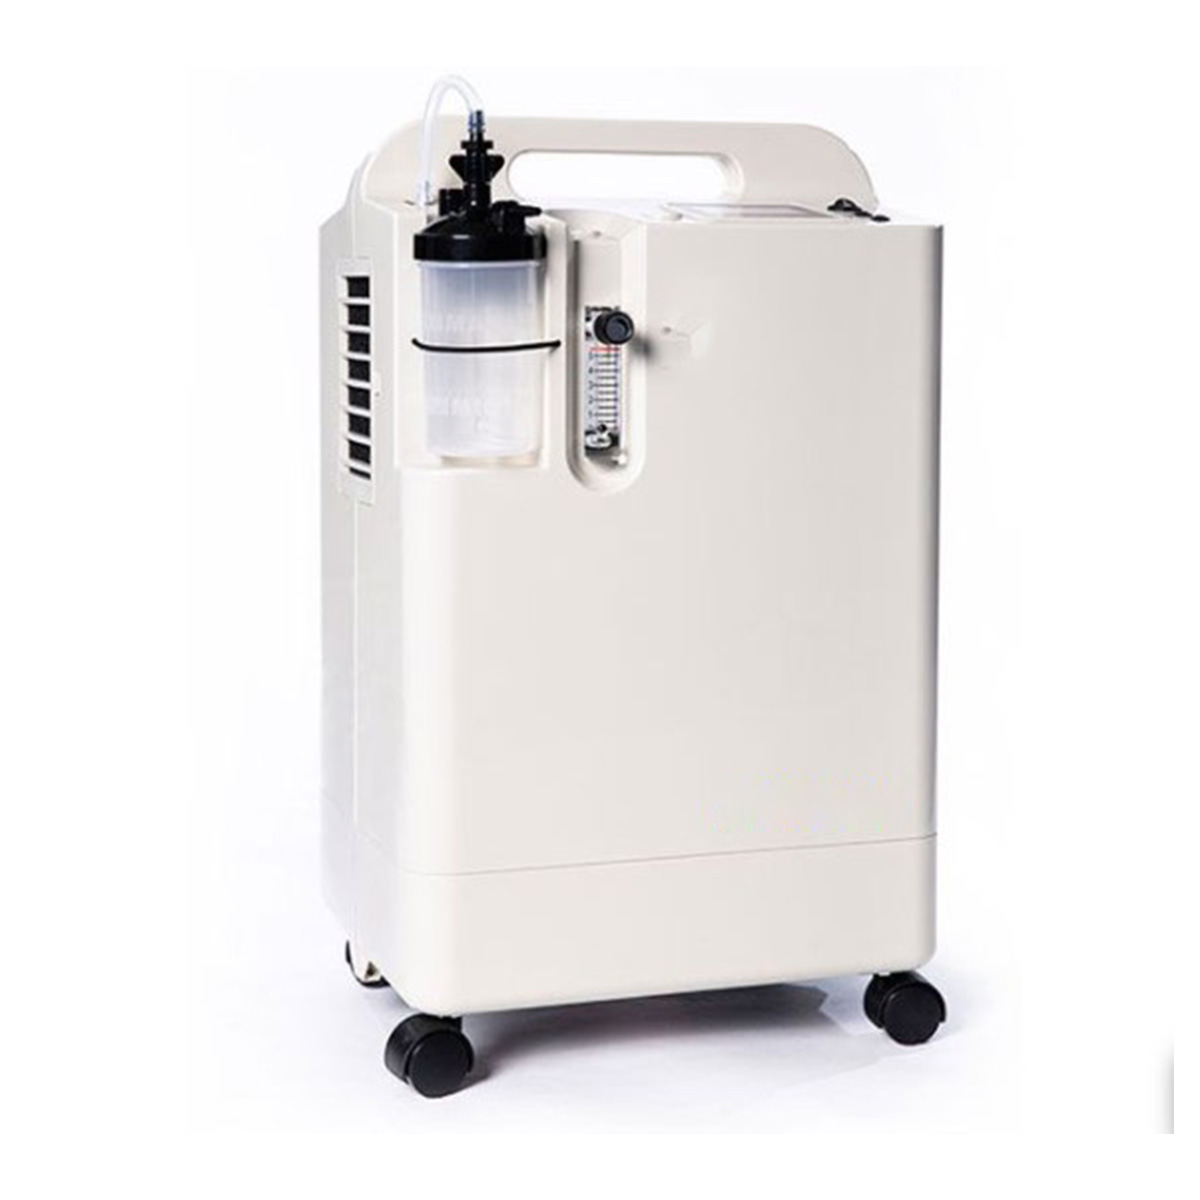 5 Longfian Oxygen Concentrator On Sale Suppliers, Service Provider in Ashok park